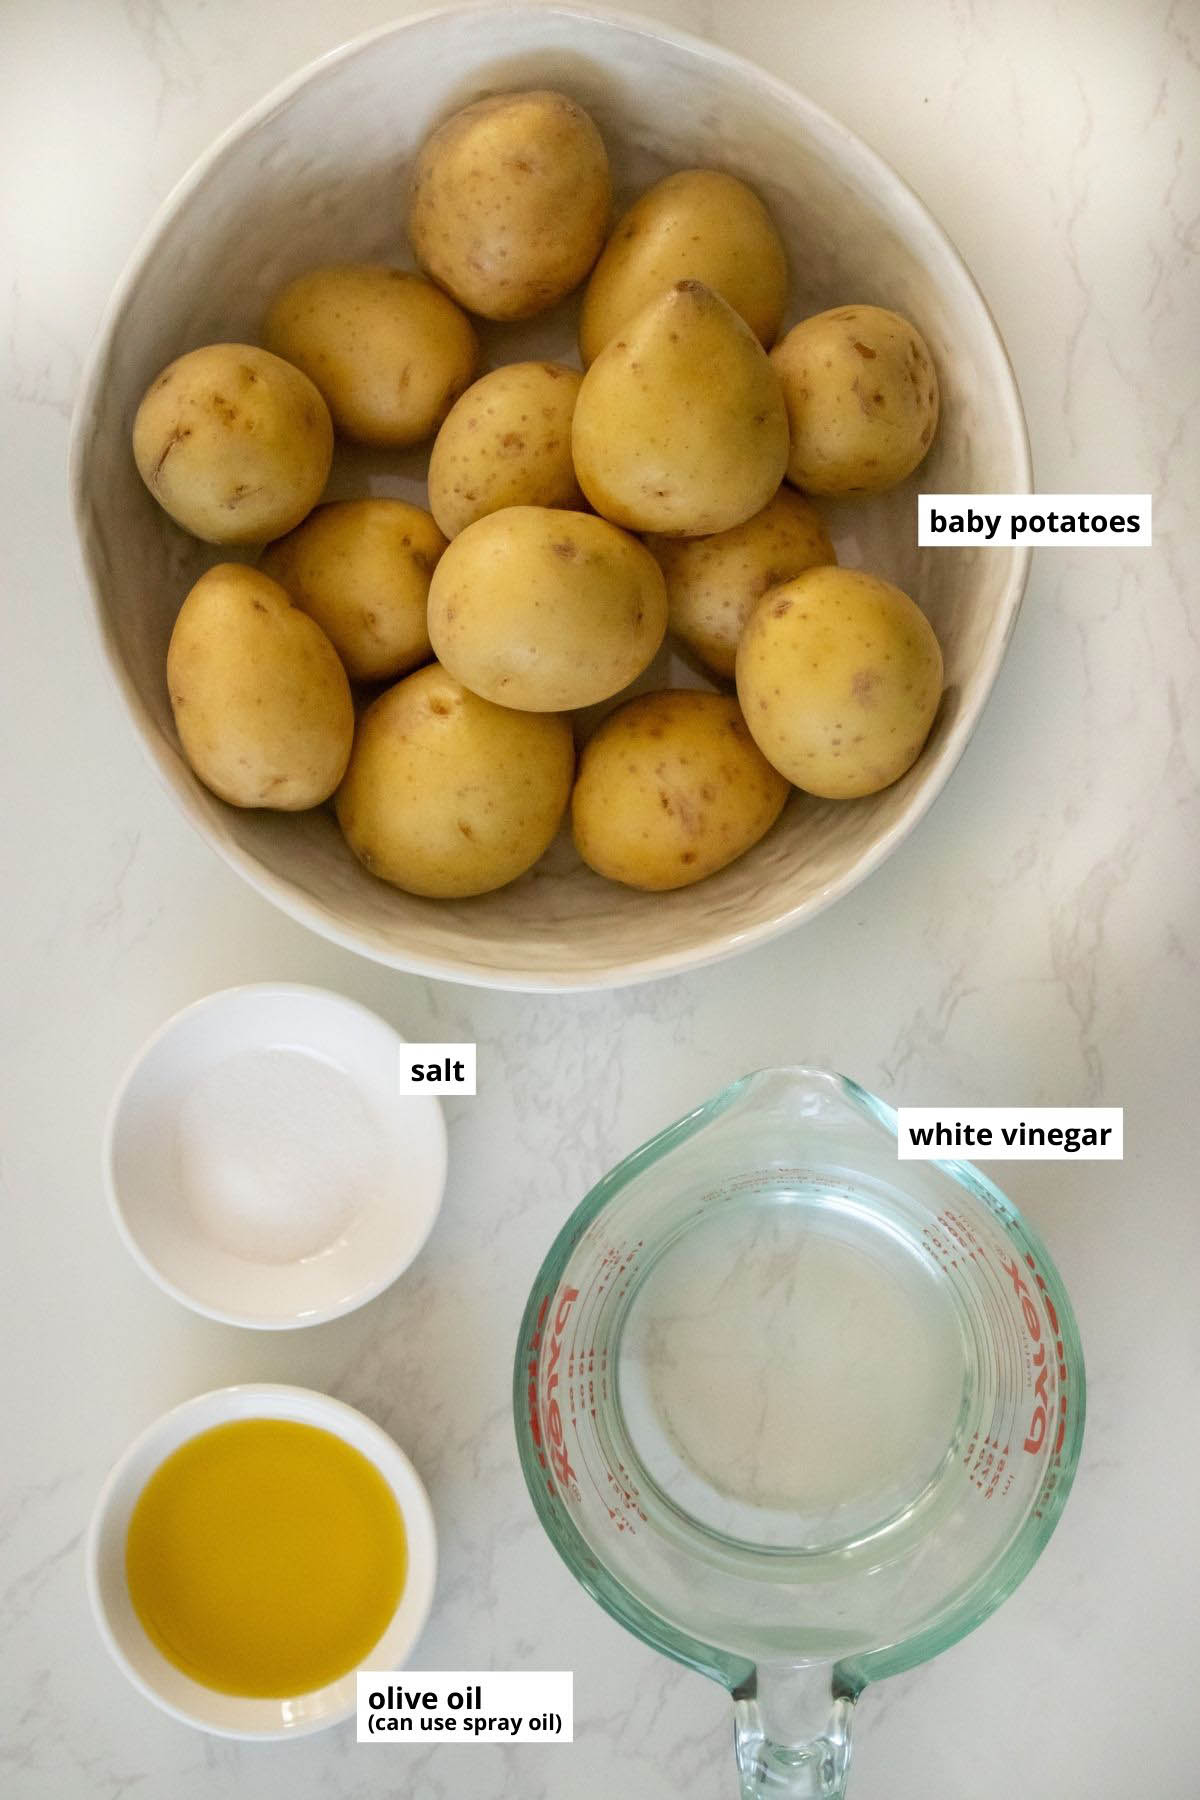 new potatoes, salt, oil, and vinegar in bowls and cups